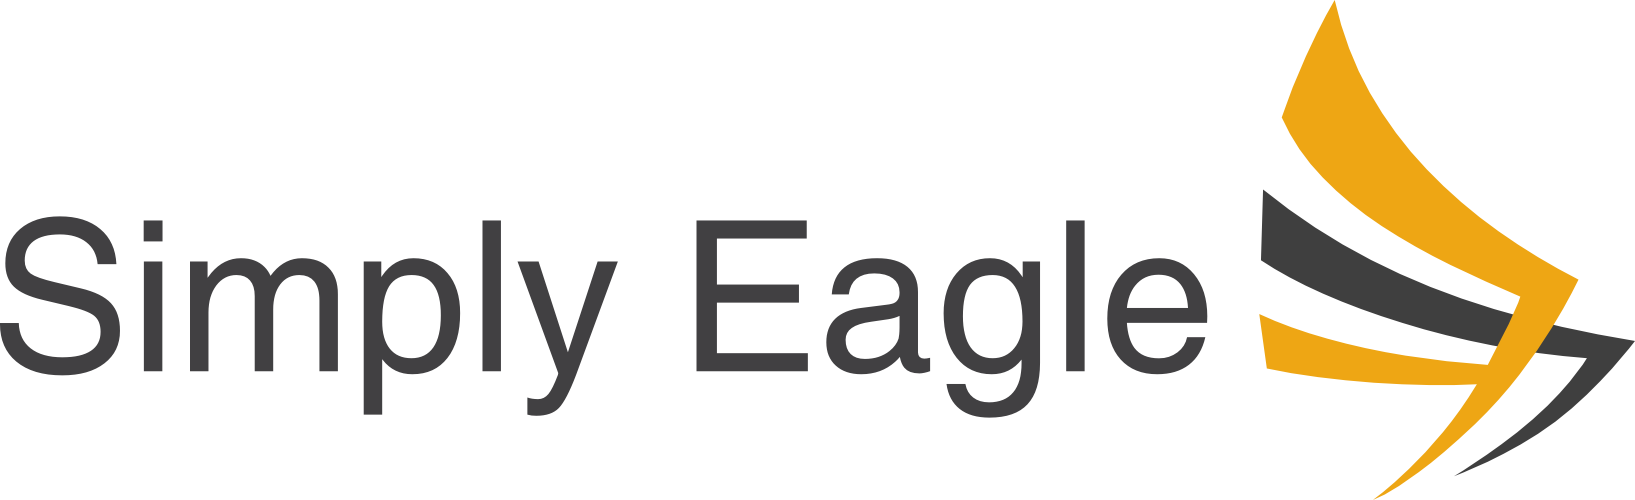 SimplyEagle.org